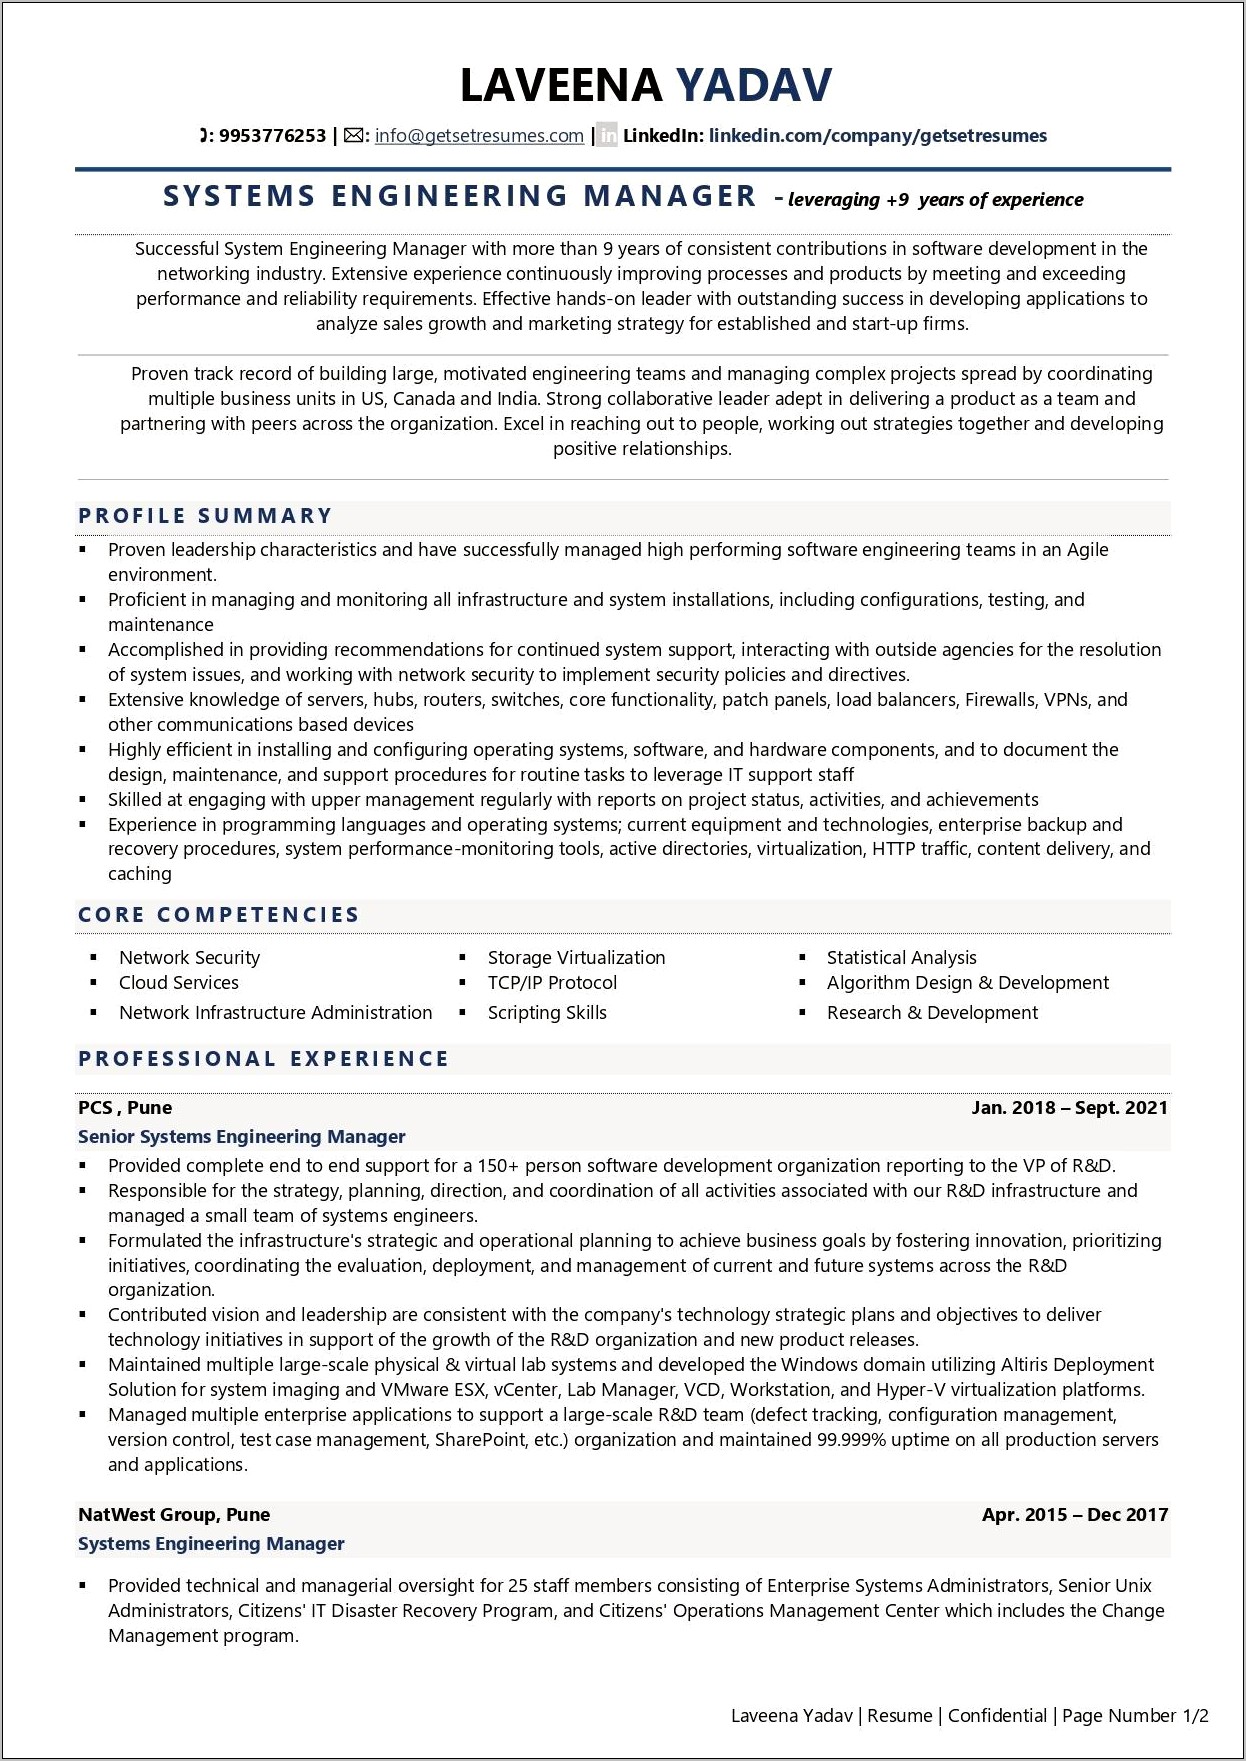 Staffing Agency Branch Manager Resume